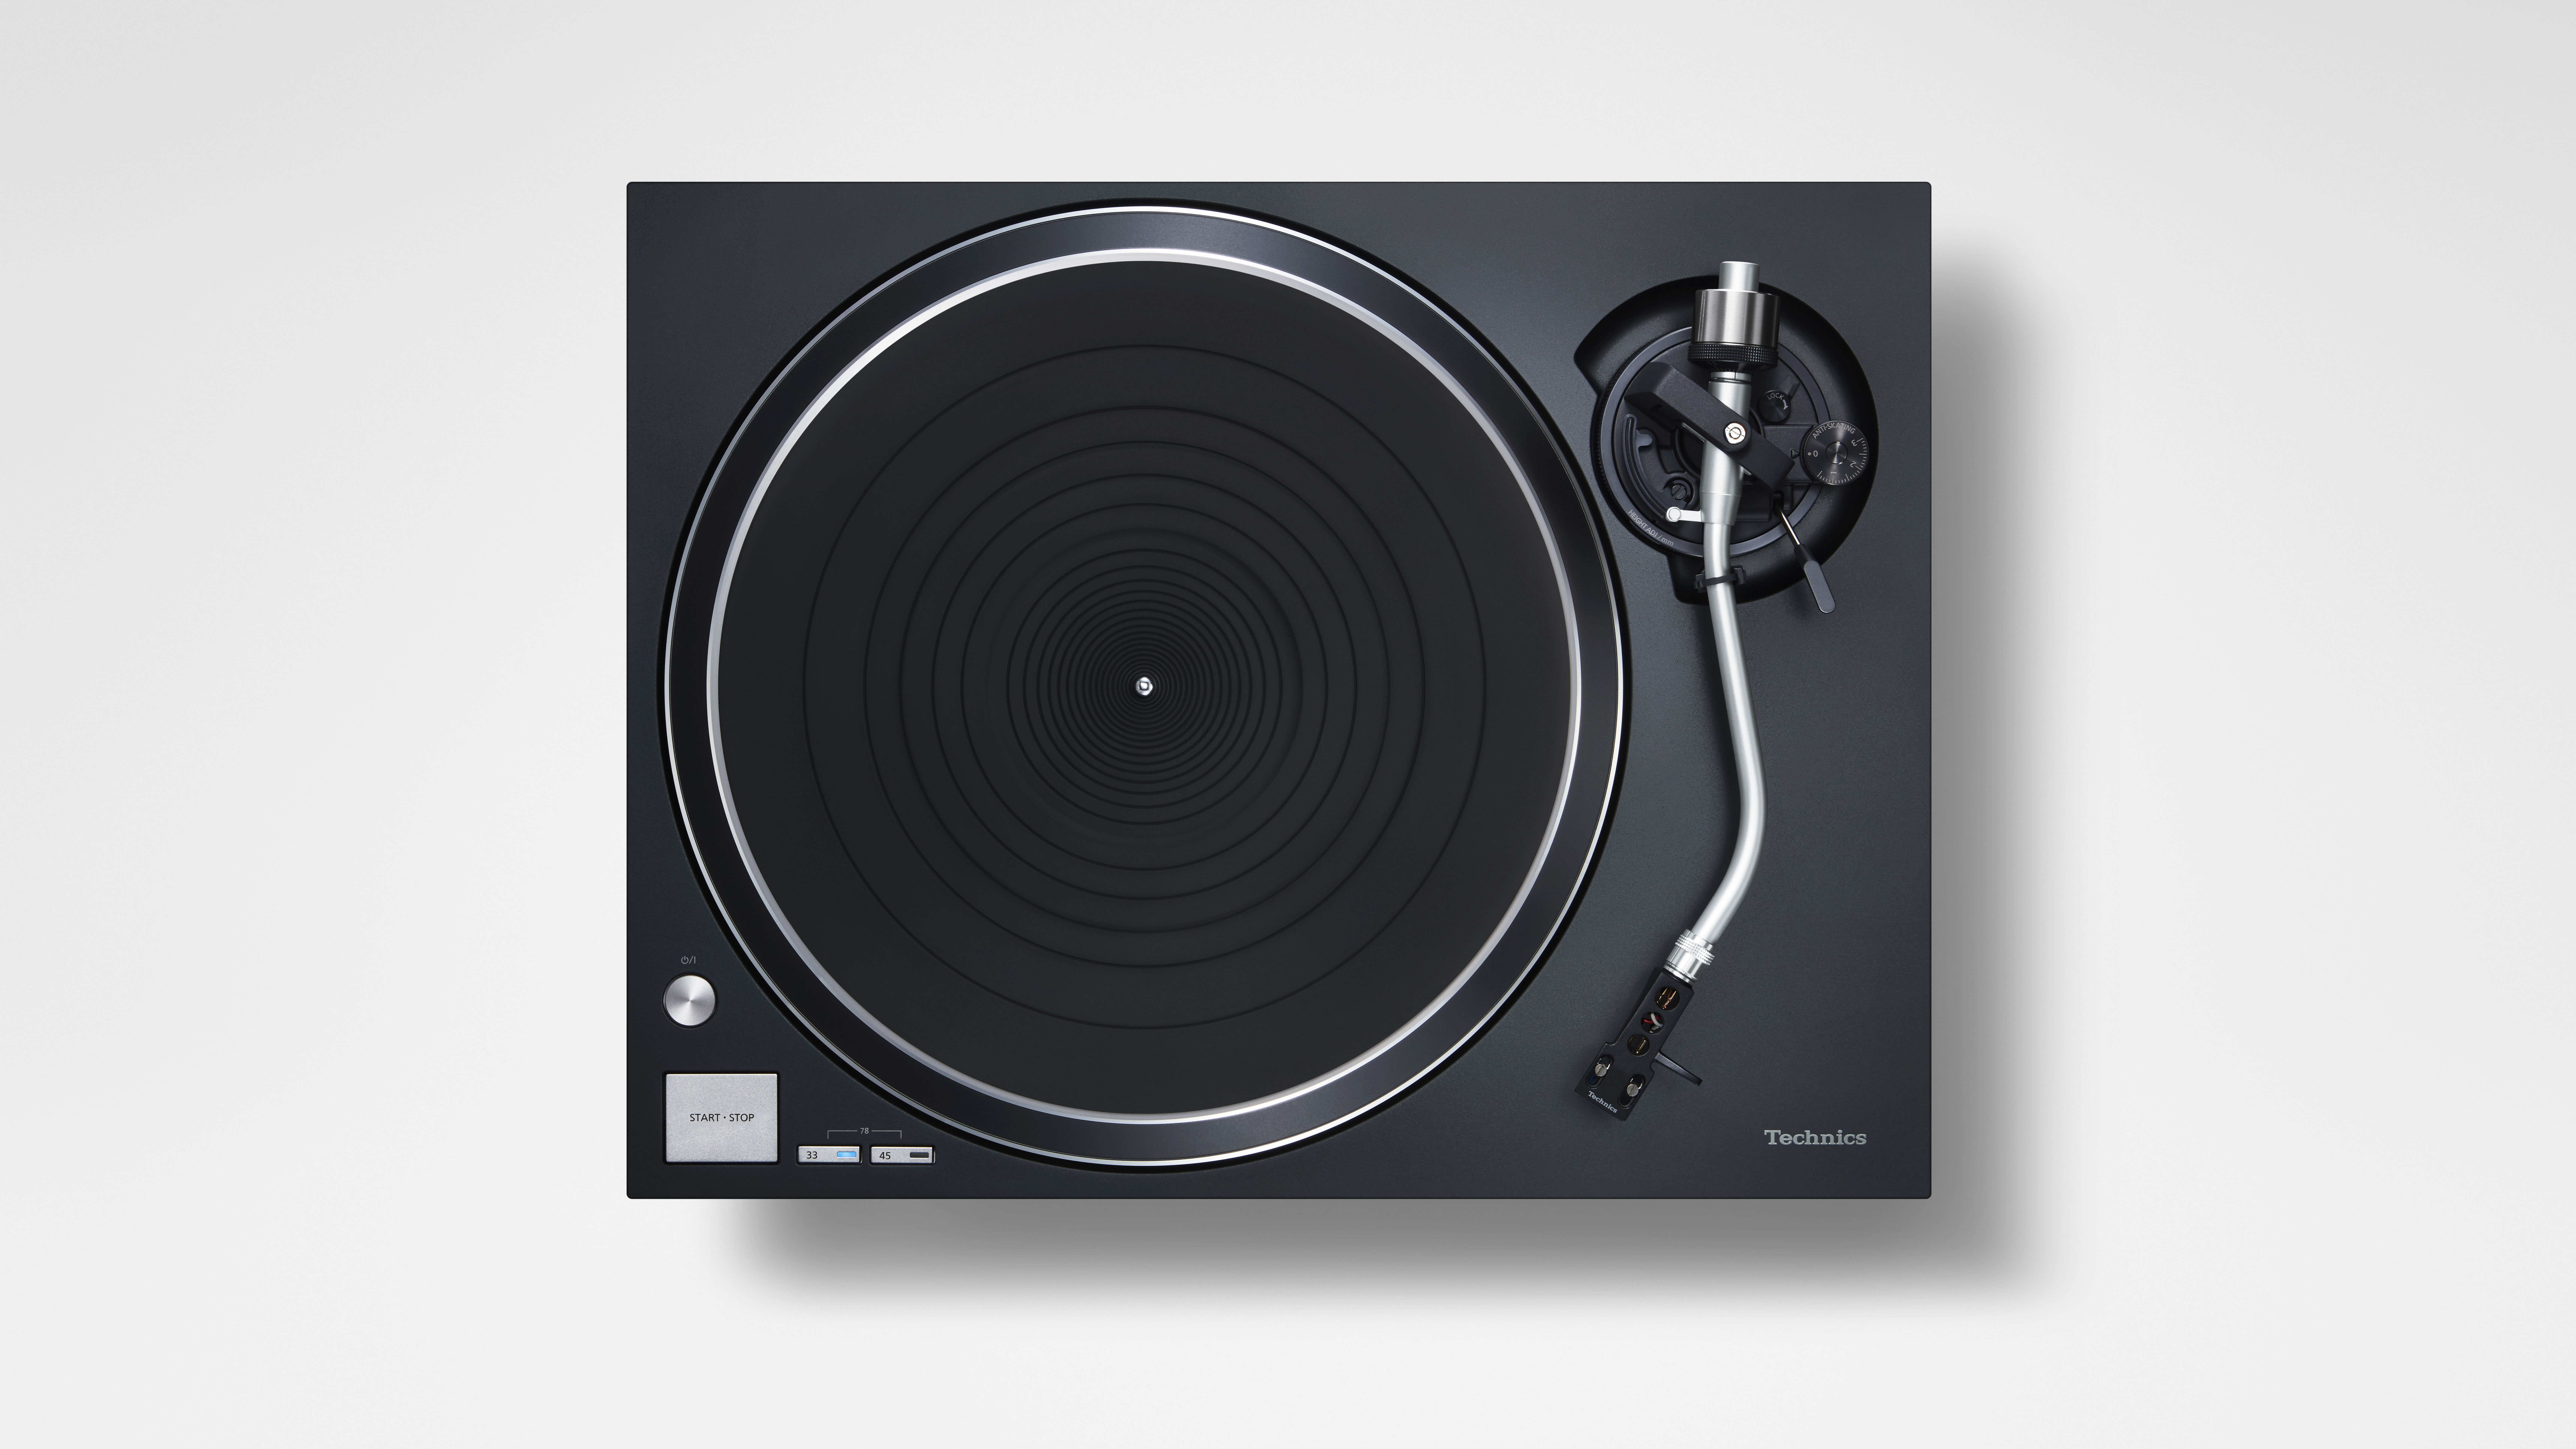 technics-has-a-new-entry-level-turntable,-the-sl-100c